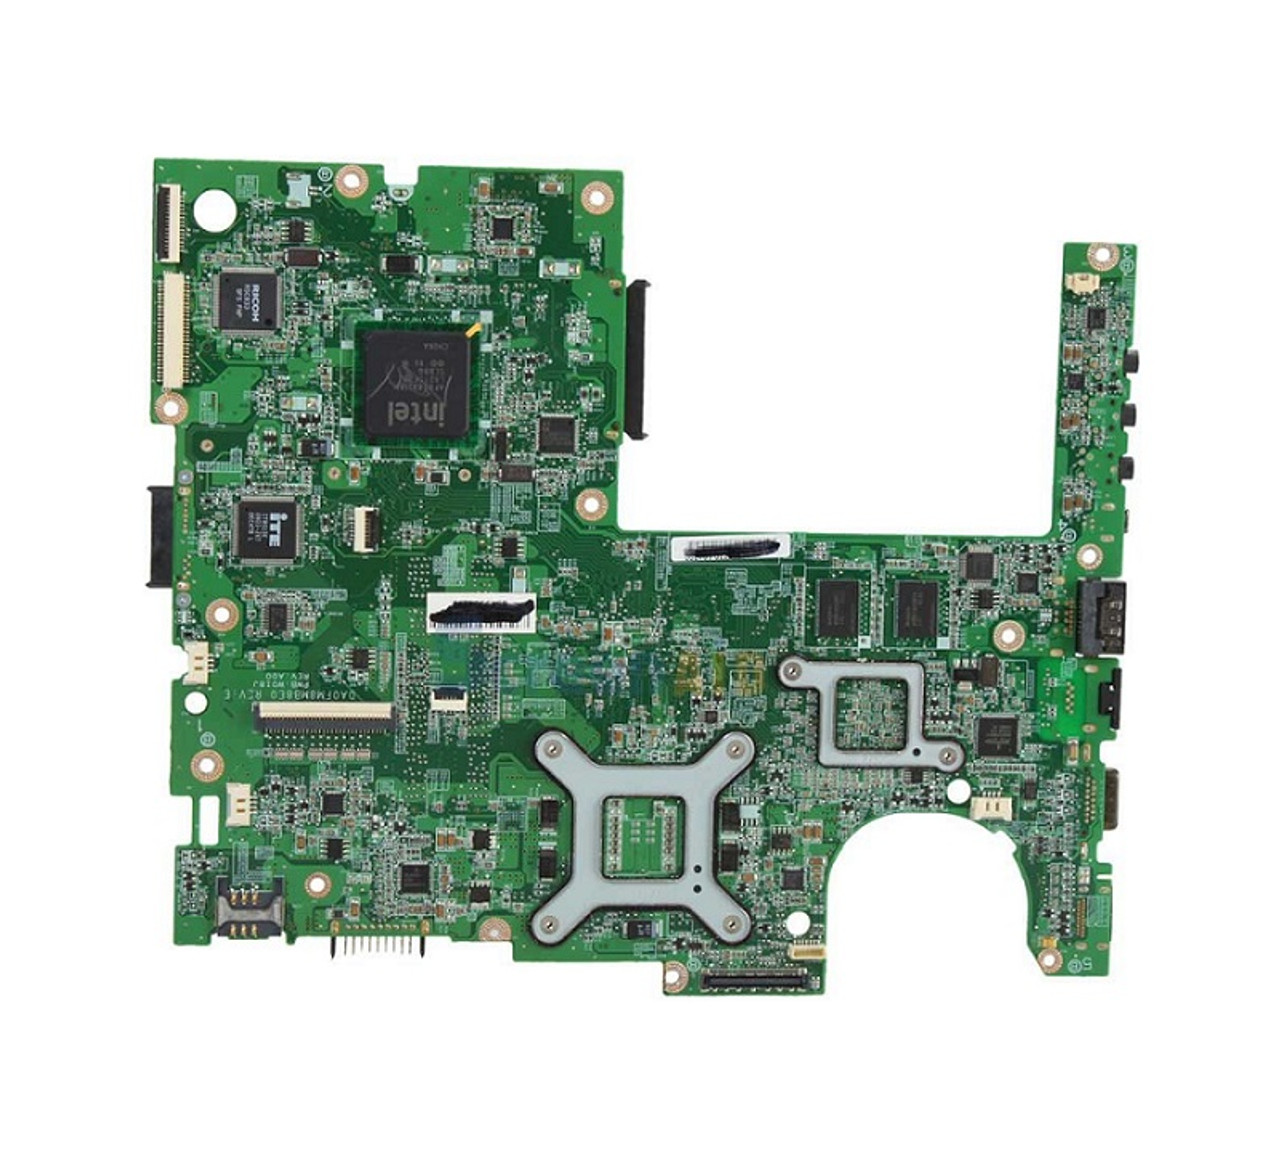 0MU715 - Dell System Board (Motherboard) for Inspiron 1530 (Refurbished)